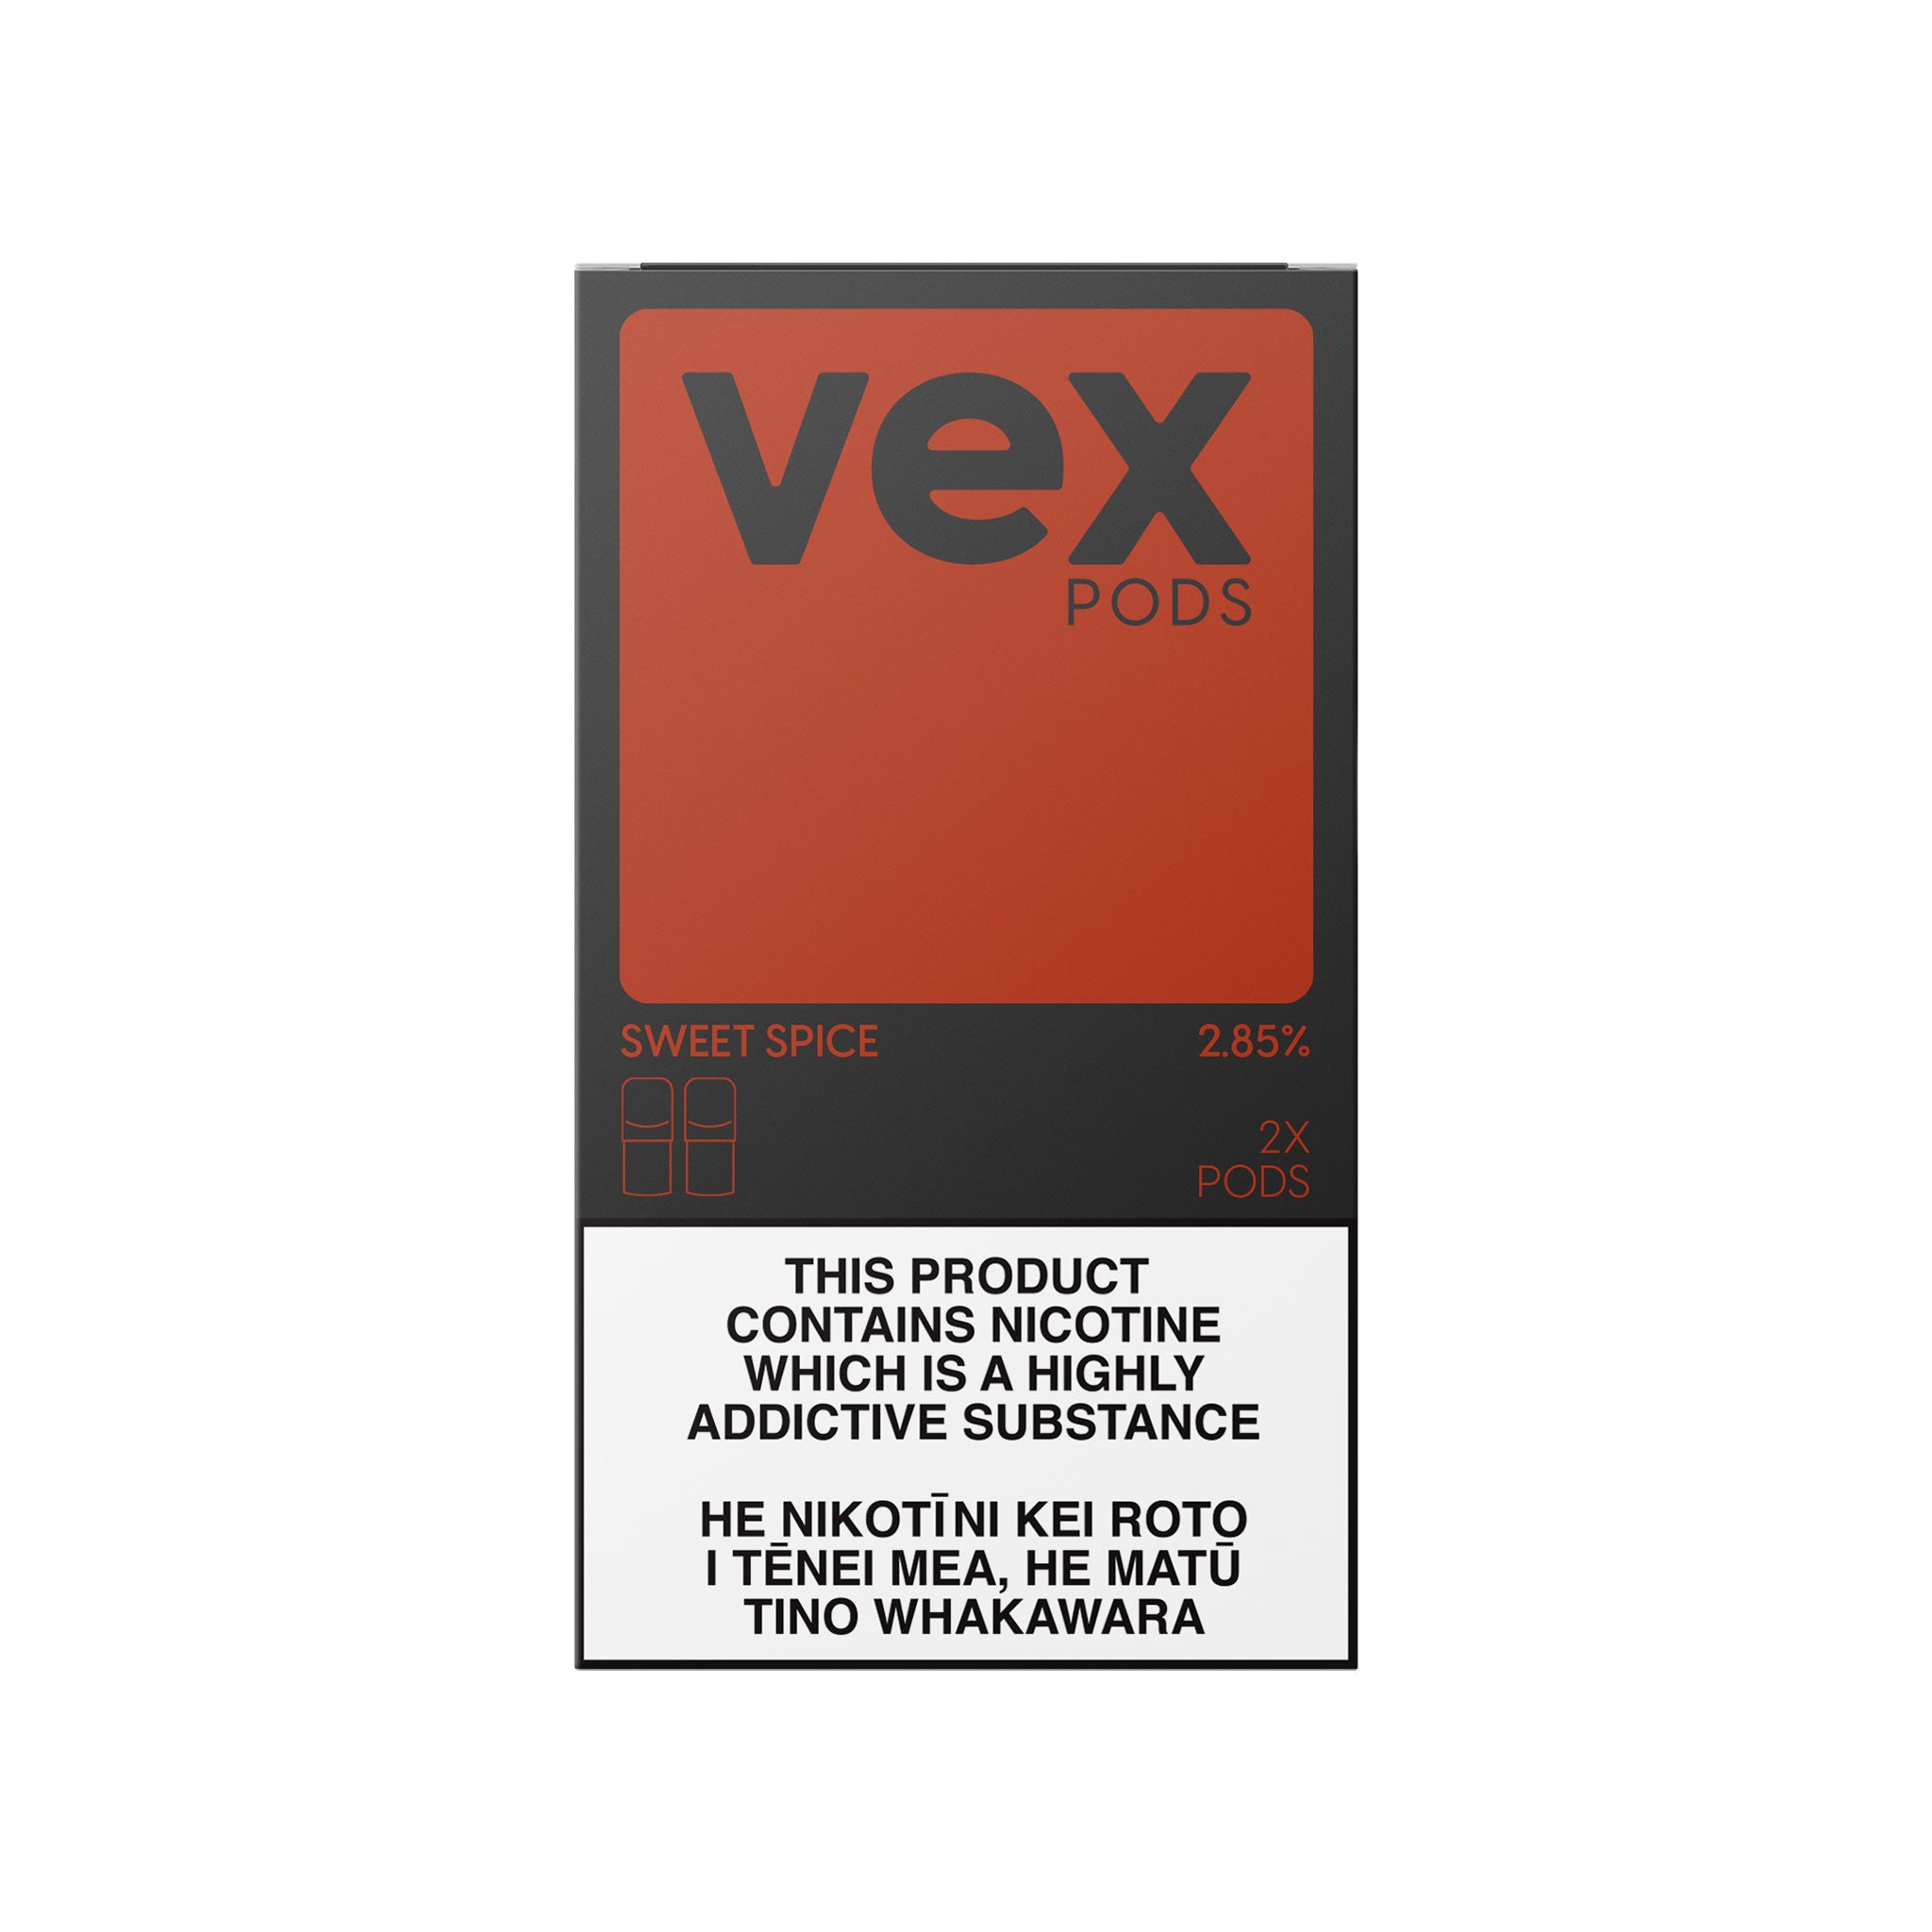 Sweet Spice Vex Replacement Pods 2-Pack